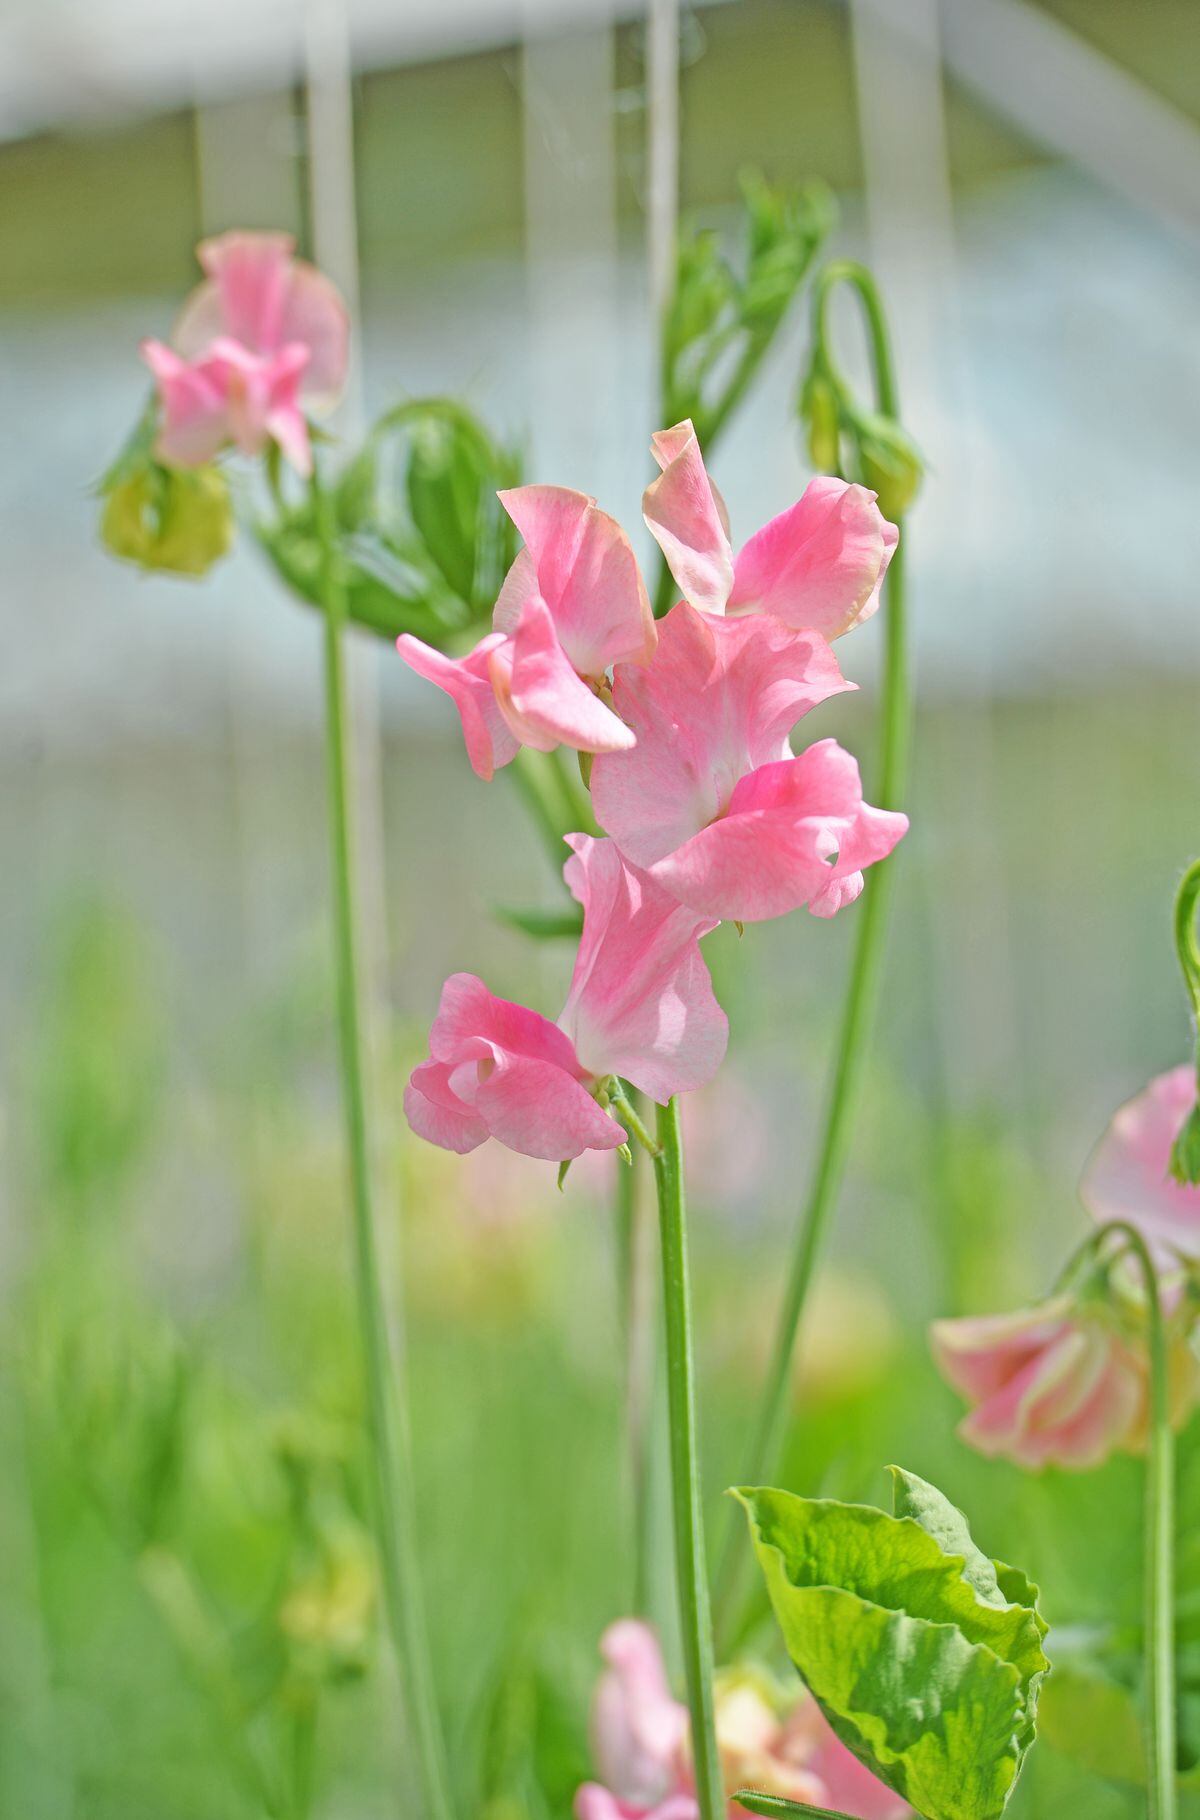 Eagle Sweet Peas has won numerous gold medals at the Chelsea Flower Show